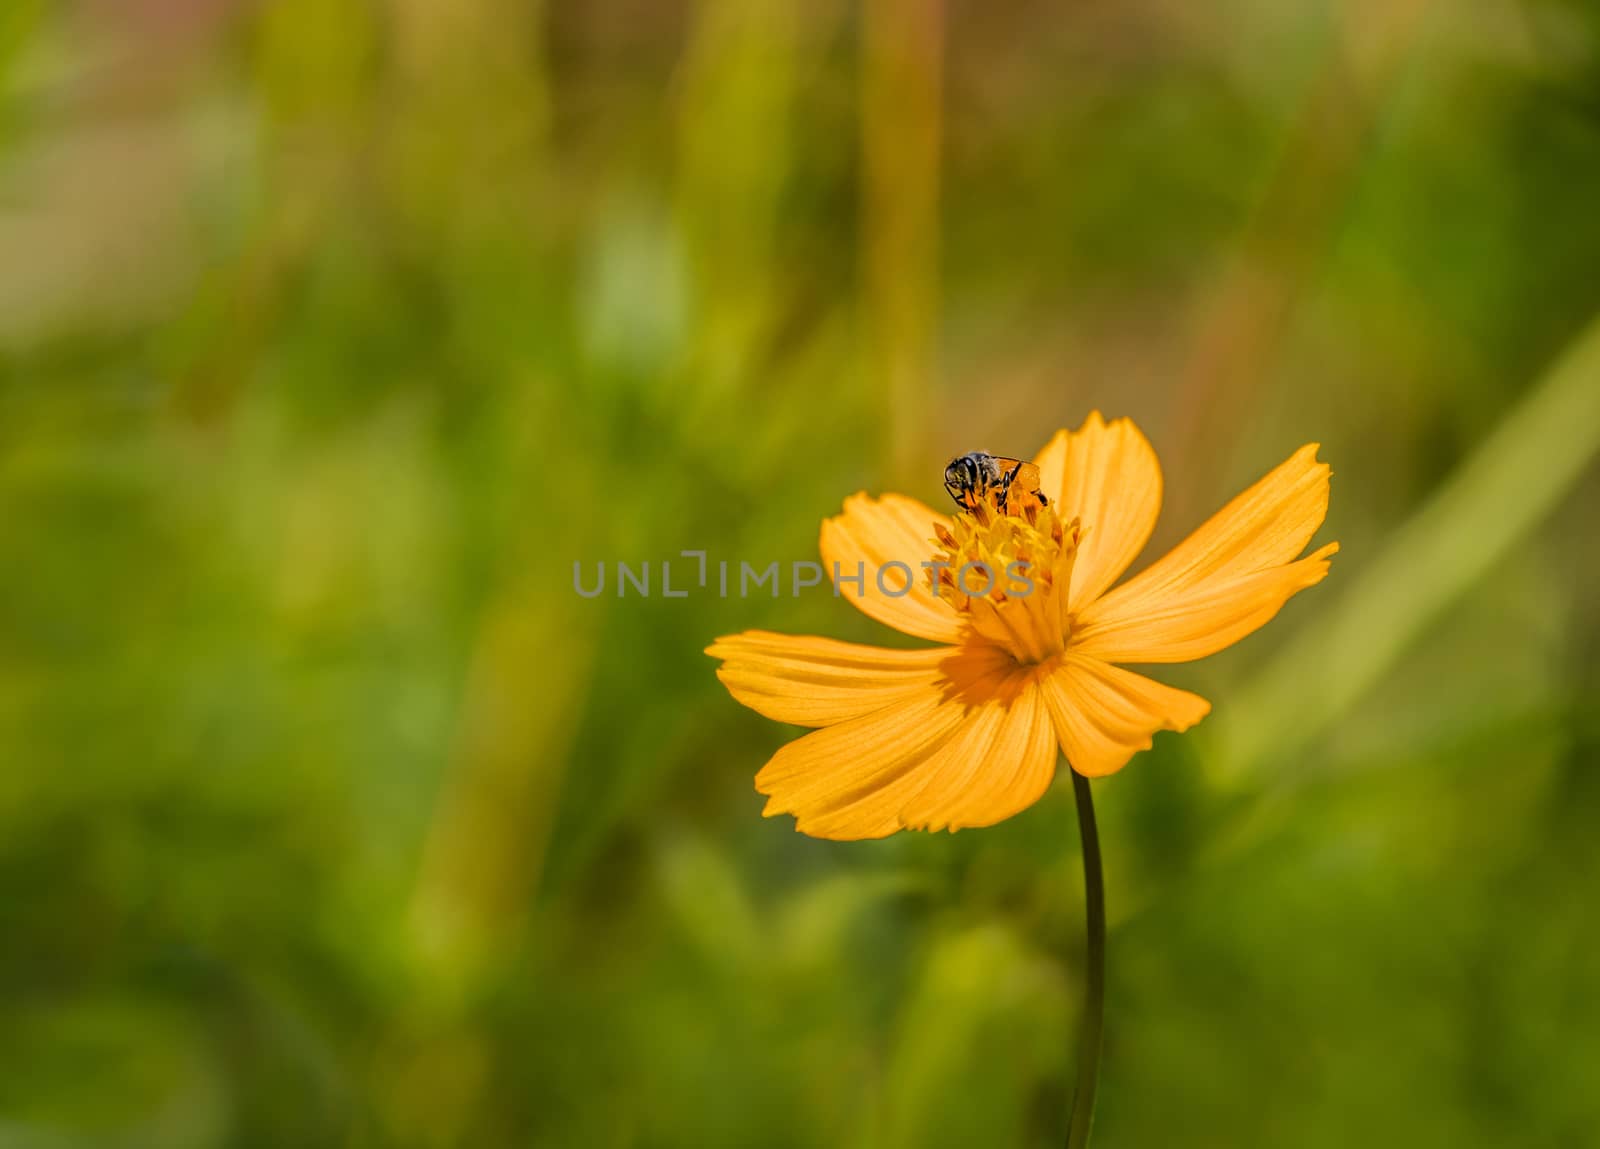 Save
Download Preview
Yellow flower with a bee holding honey